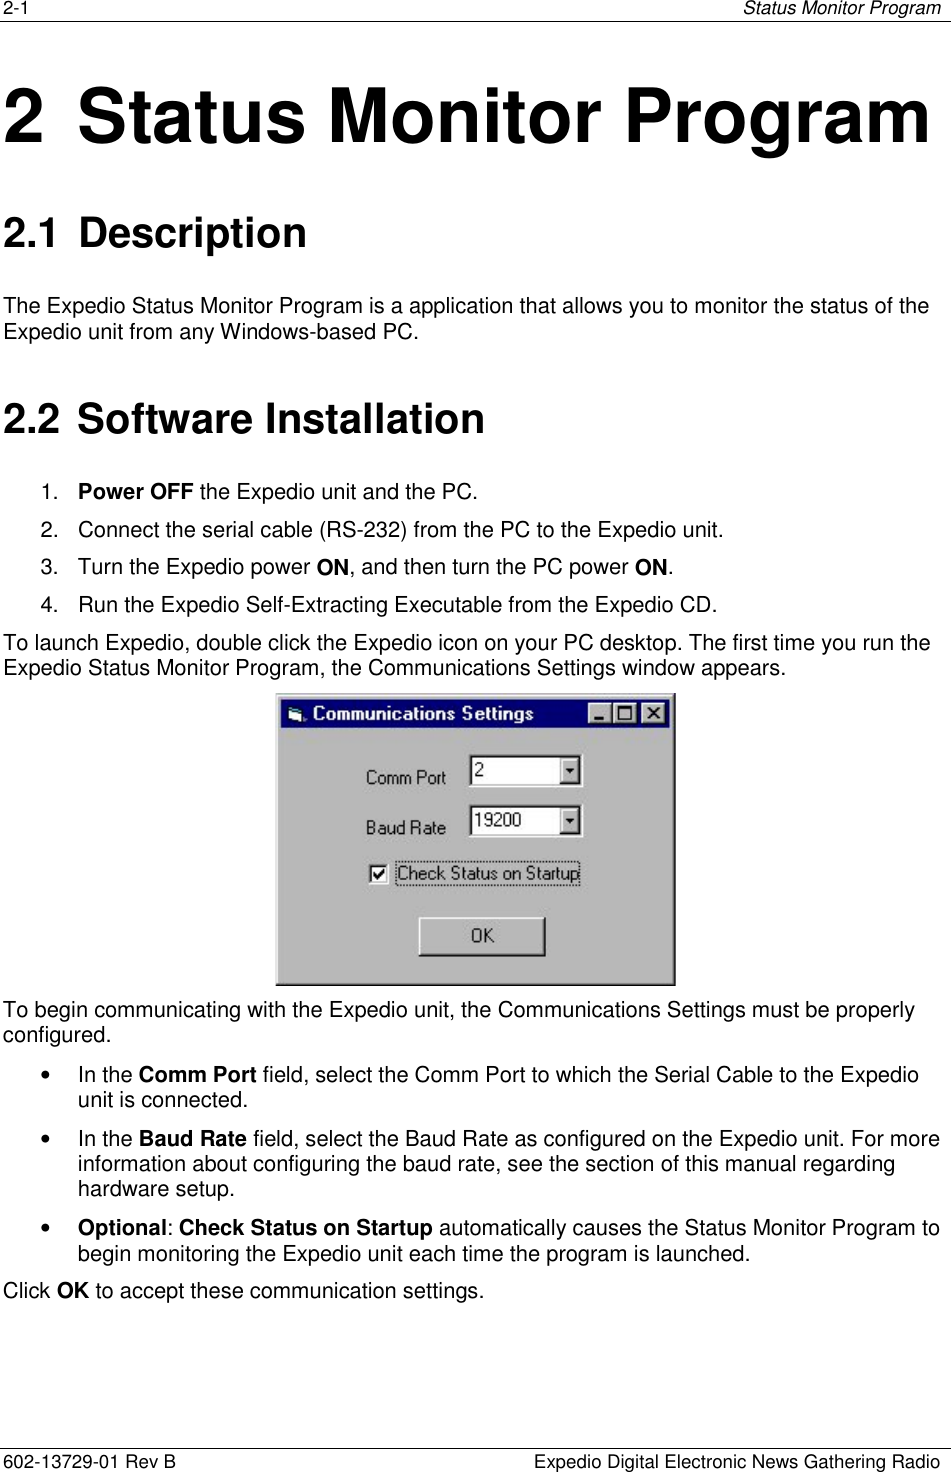 2-1  Status Monitor Program  602-13729-01 Rev B    Expedio Digital Electronic News Gathering Radio 2  Status Monitor Program 2.1 Description The Expedio Status Monitor Program is a application that allows you to monitor the status of the Expedio unit from any Windows-based PC. 2.2 Software Installation 1.  Power OFF the Expedio unit and the PC. 2.  Connect the serial cable (RS-232) from the PC to the Expedio unit.  3.  Turn the Expedio power ON, and then turn the PC power ON.  4.  Run the Expedio Self-Extracting Executable from the Expedio CD. To launch Expedio, double click the Expedio icon on your PC desktop. The first time you run the Expedio Status Monitor Program, the Communications Settings window appears.  To begin communicating with the Expedio unit, the Communications Settings must be properly configured. •  In the Comm Port field, select the Comm Port to which the Serial Cable to the Expedio unit is connected. •  In the Baud Rate field, select the Baud Rate as configured on the Expedio unit. For more information about configuring the baud rate, see the section of this manual regarding hardware setup. •  Optional: Check Status on Startup automatically causes the Status Monitor Program to begin monitoring the Expedio unit each time the program is launched.  Click OK to accept these communication settings. 